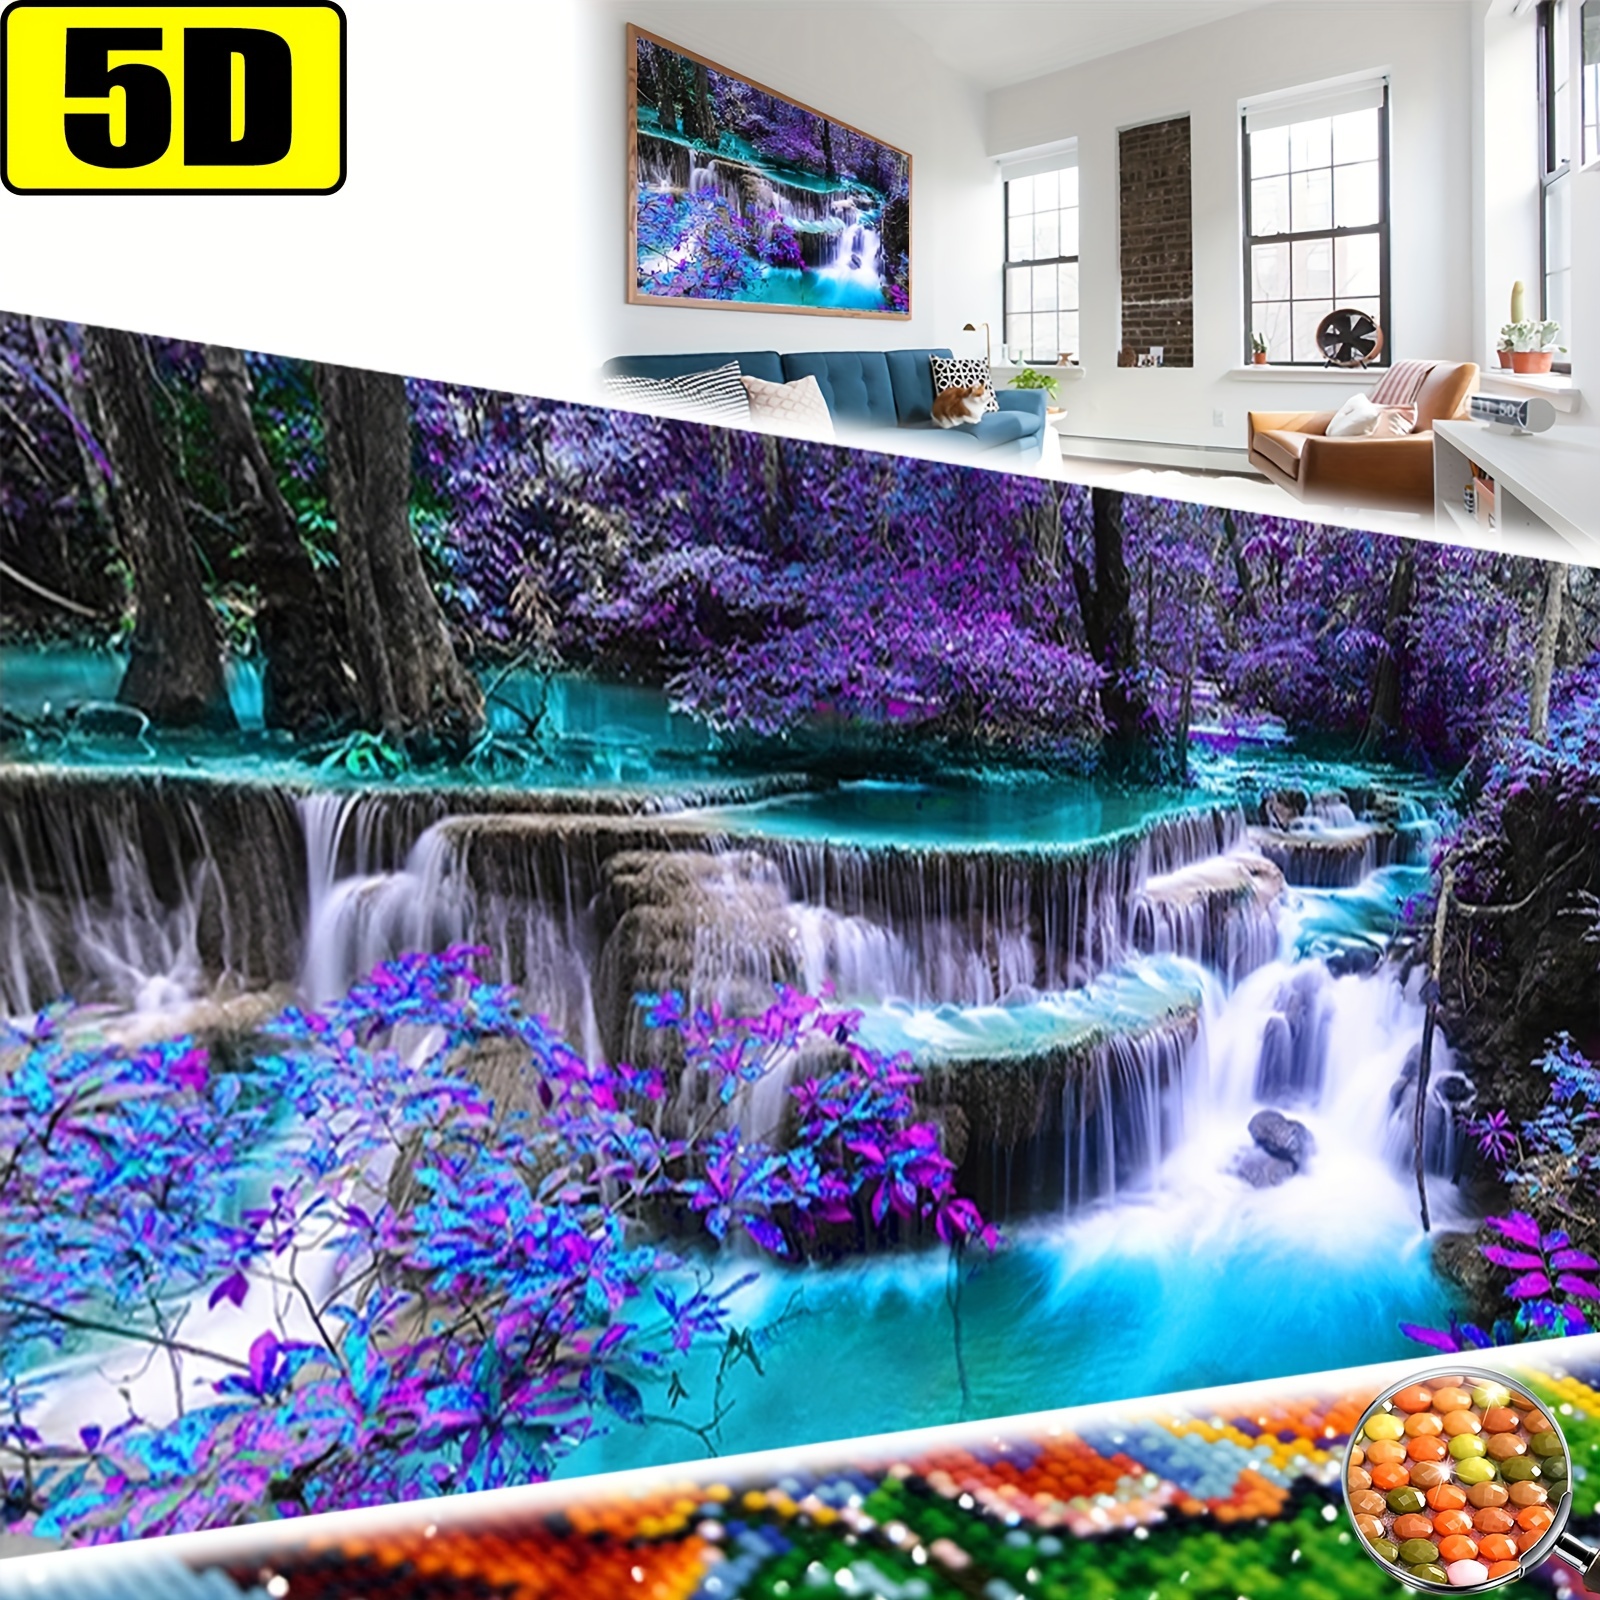  Jethami Large Size Diamond Painting Kits for Adults, 5D DIY  Mountains Waterfall Landscape Diamond Painting, Big Diamond Art Kits Round  Dimond Dots Paint with Diamonds for Beginners 31.5 x 15.7 in 